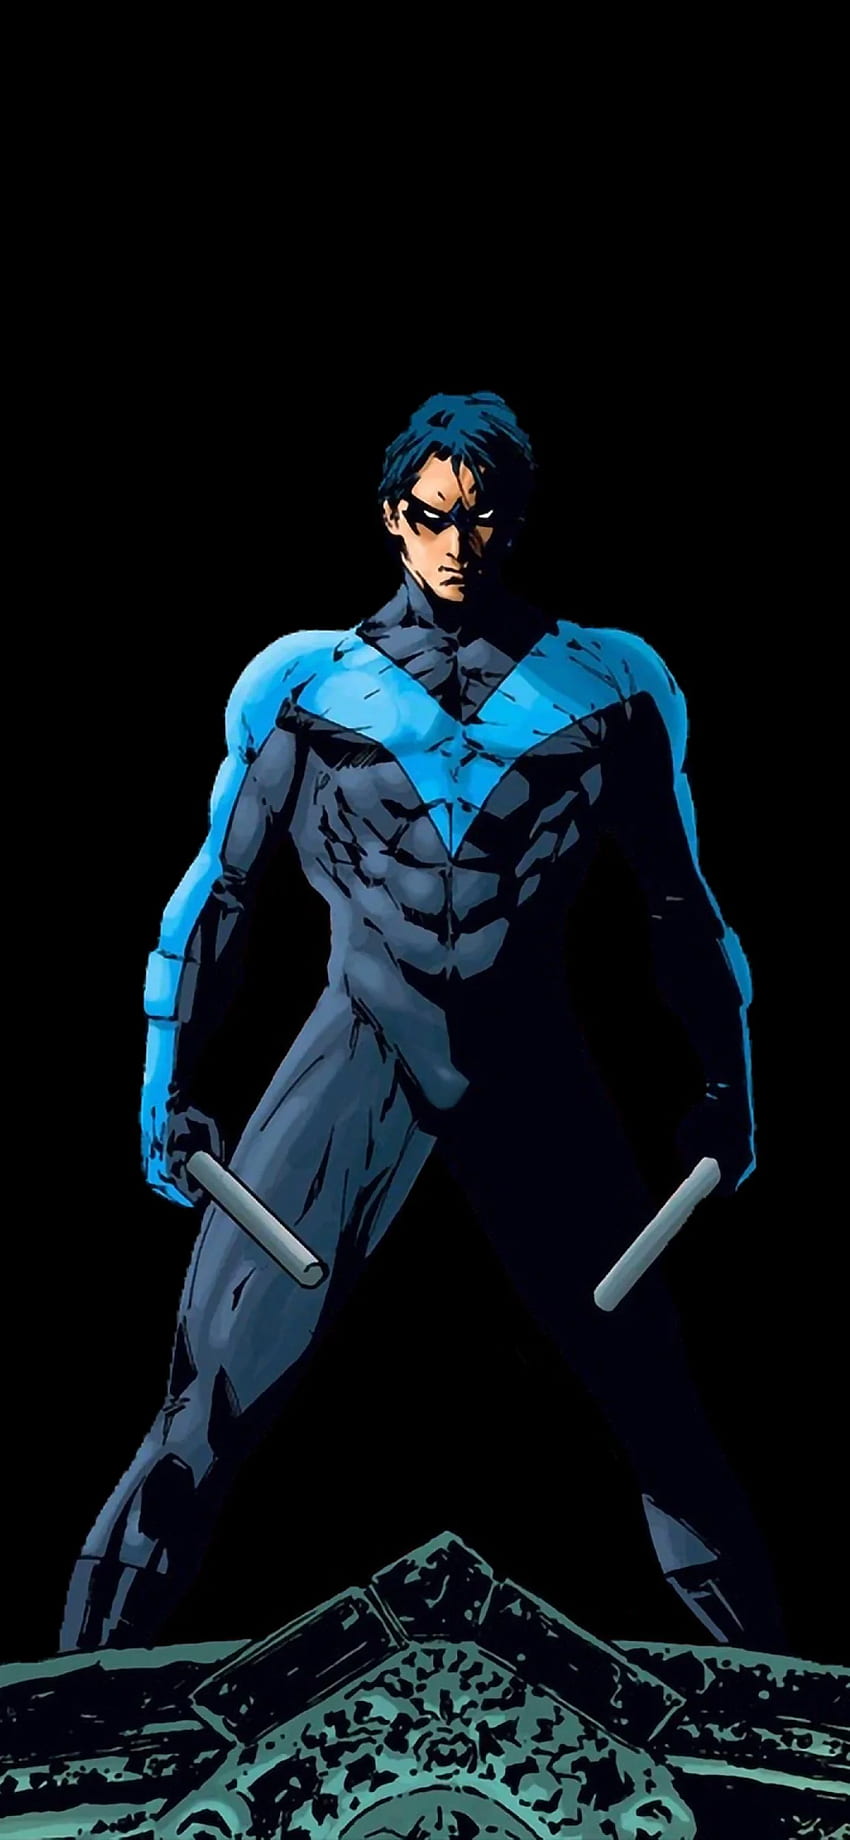 dick grayson iPhone Wallpapers Free Download